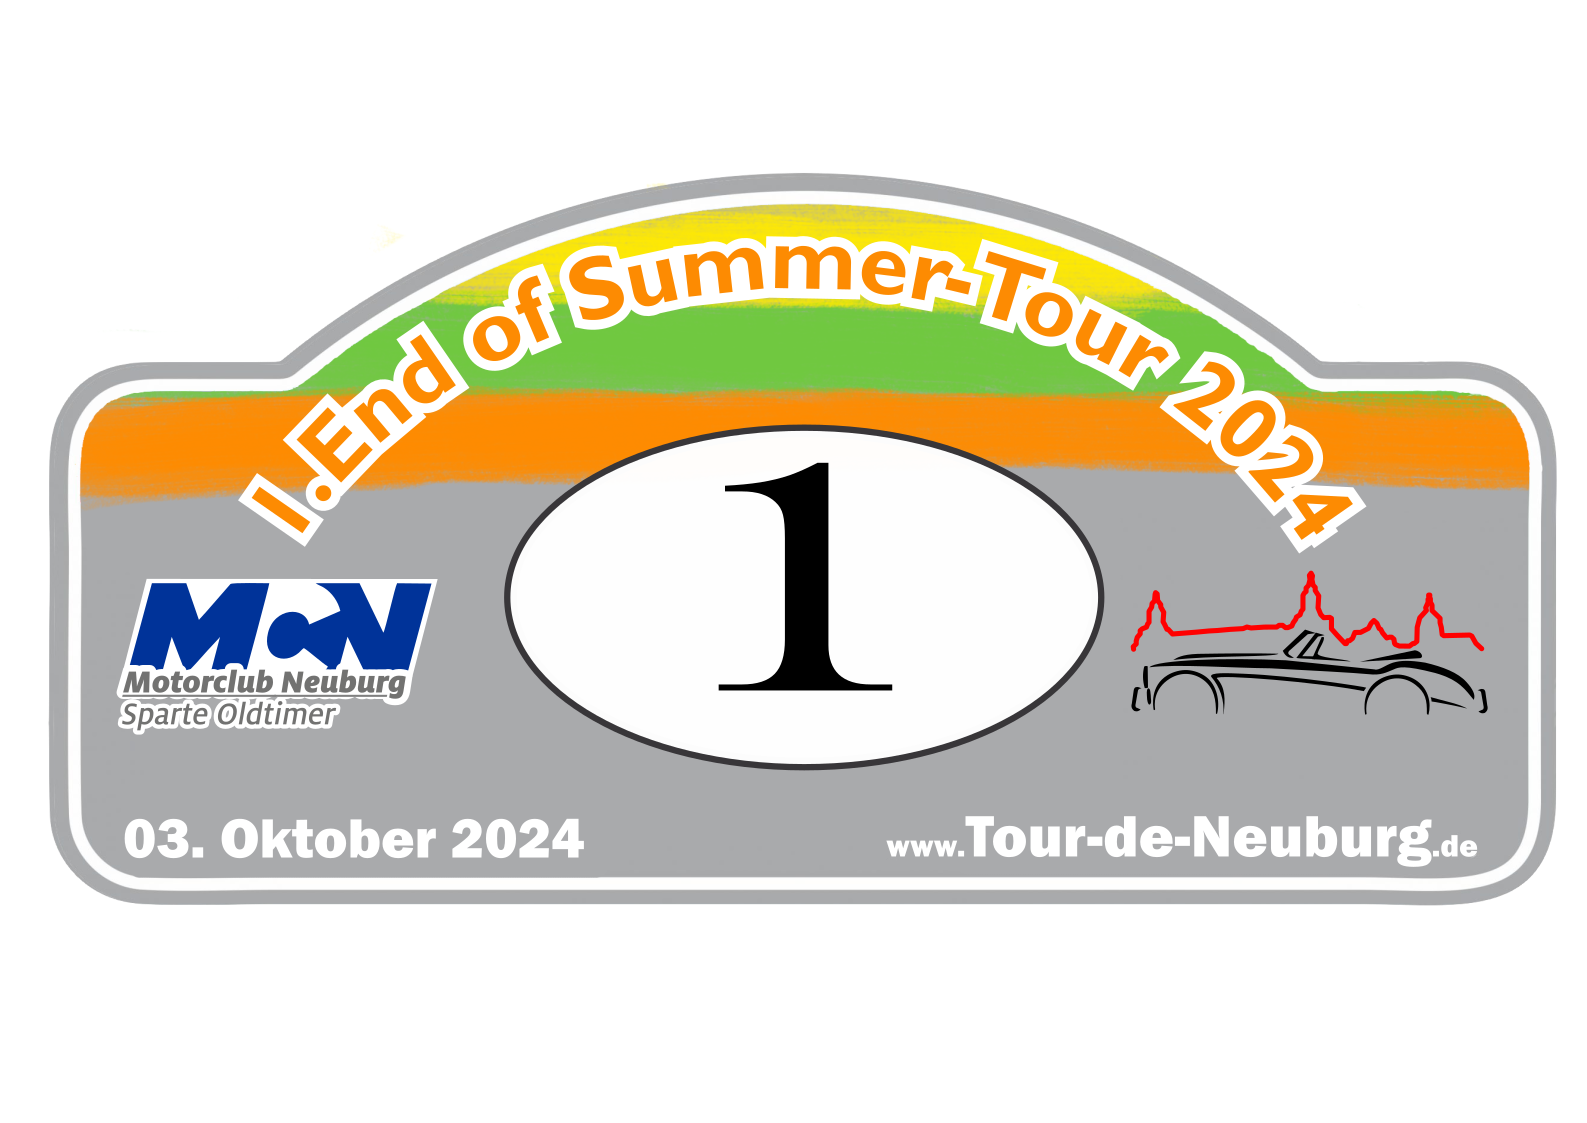 1. End of Summer-Tour